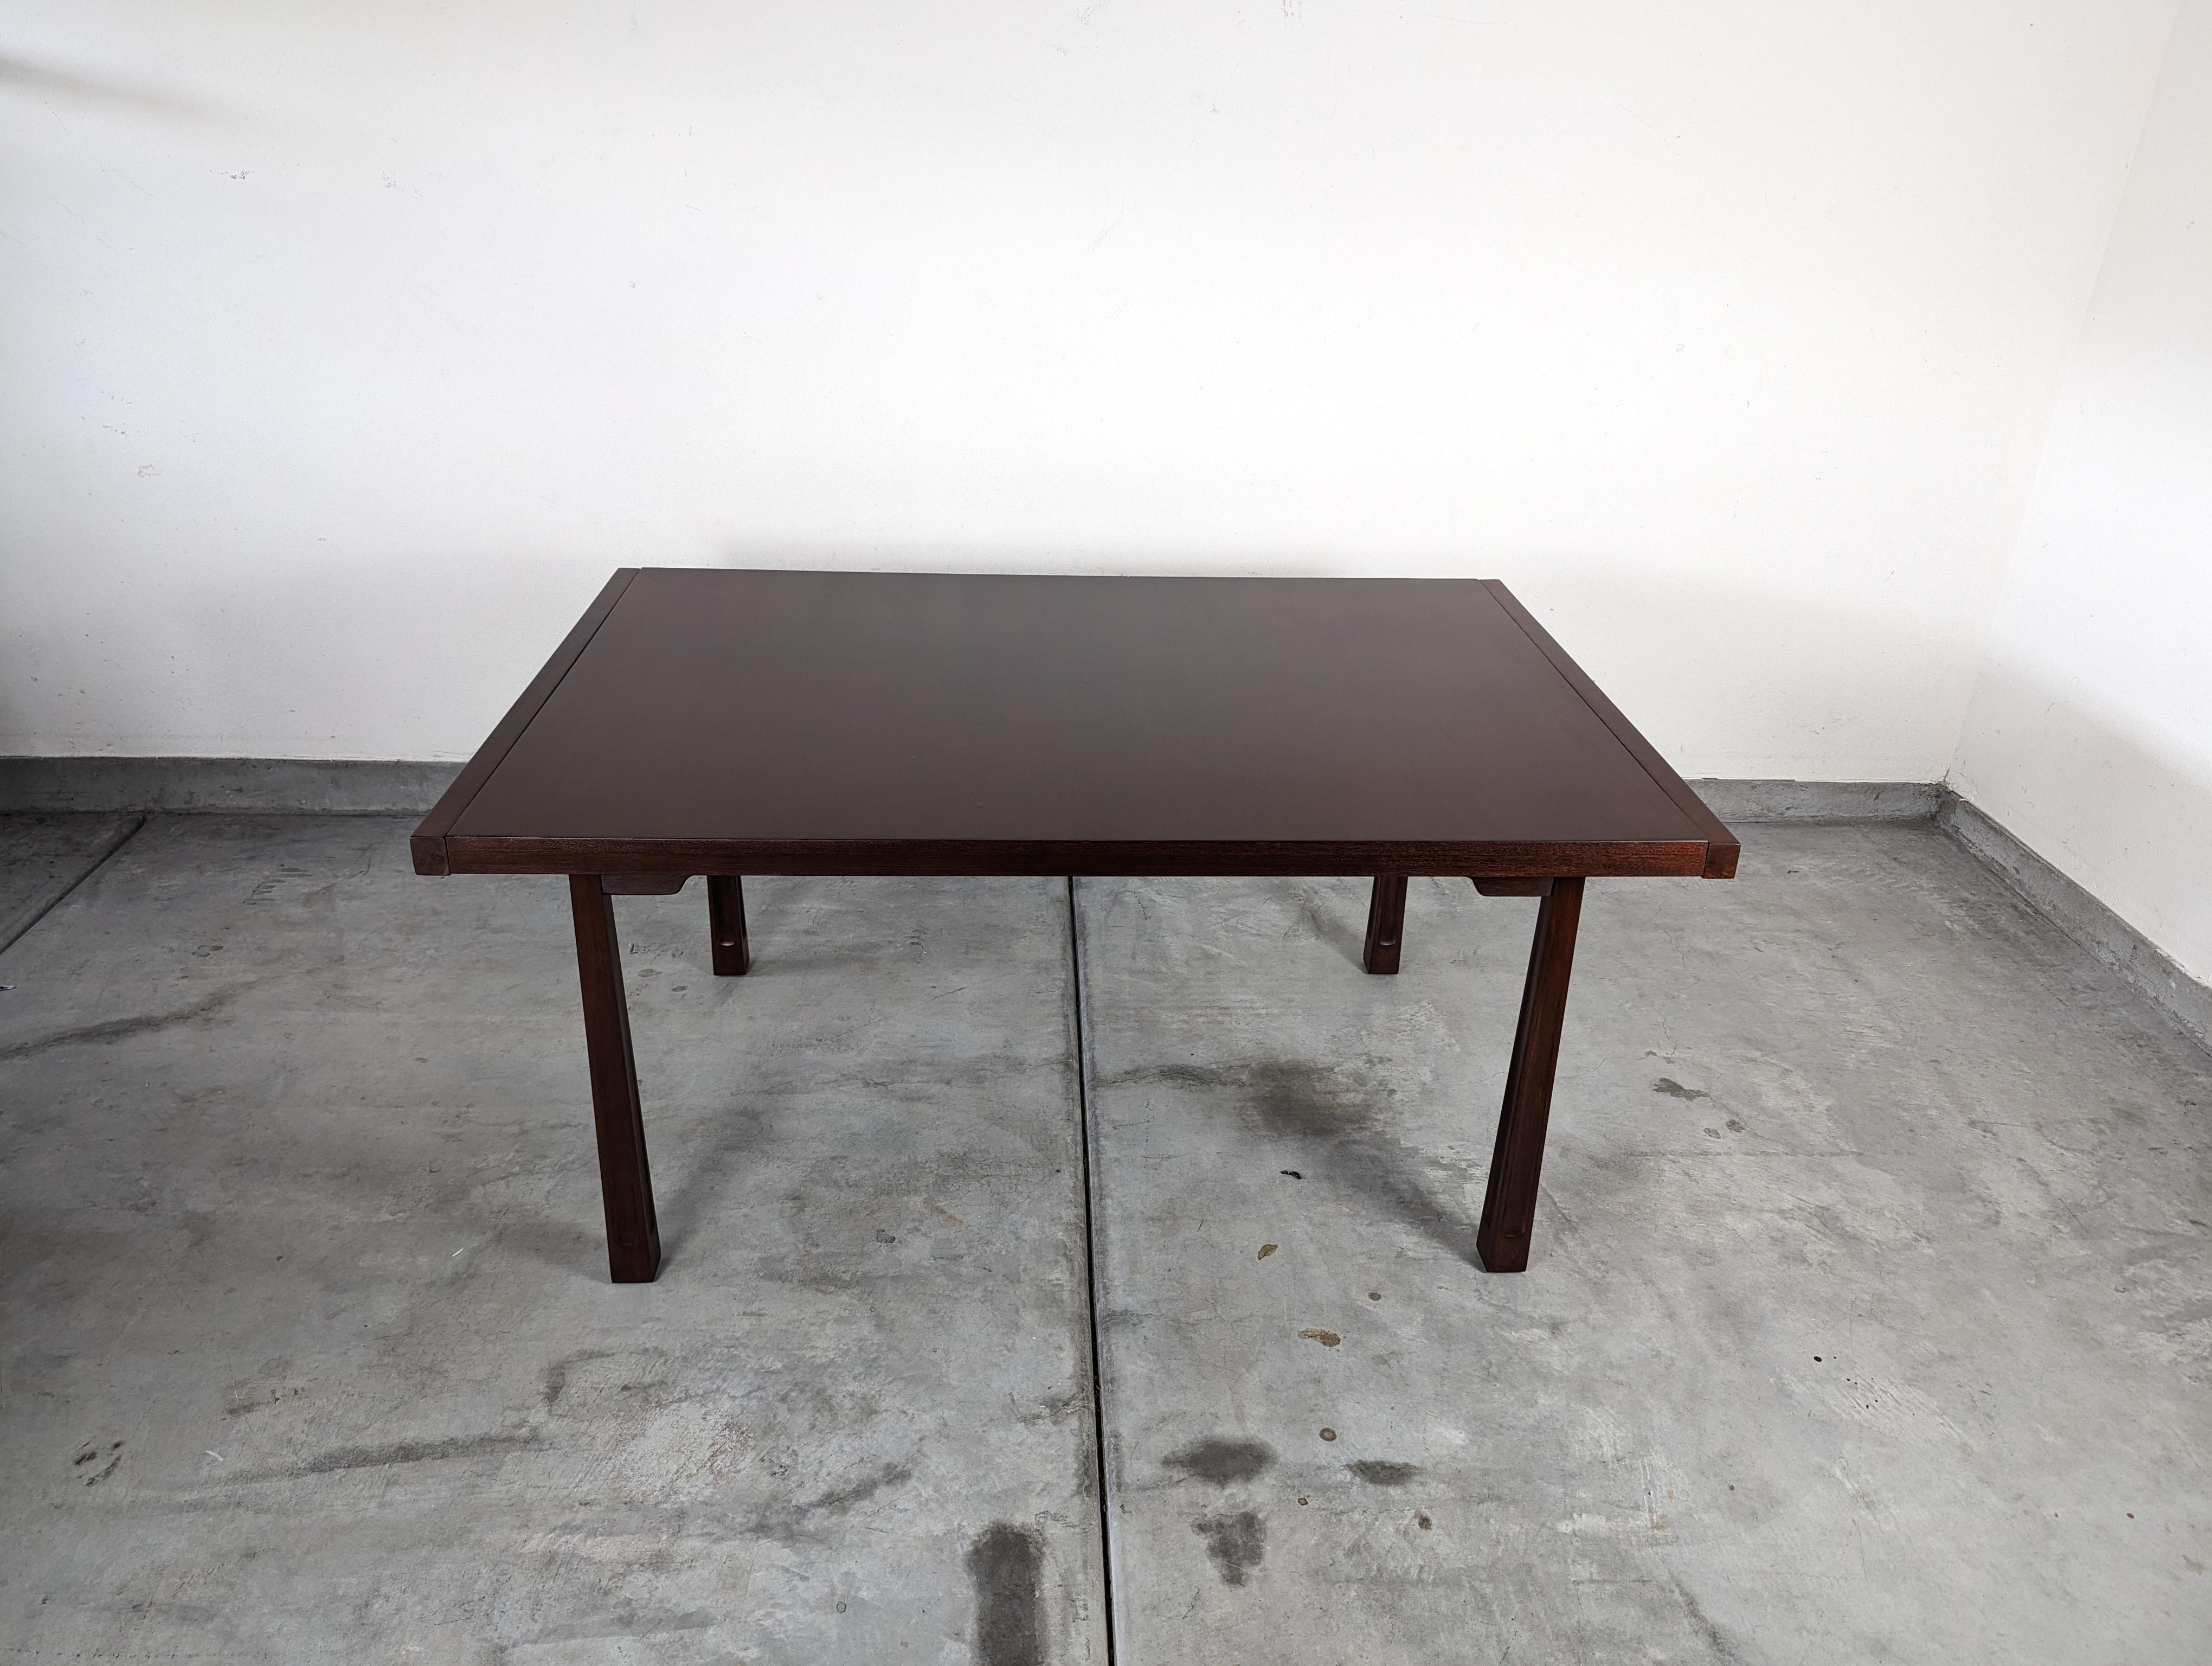 Mahogany Mid-Century Dining Table by Edmond J. Spence for Industria Mueblera of Mexico